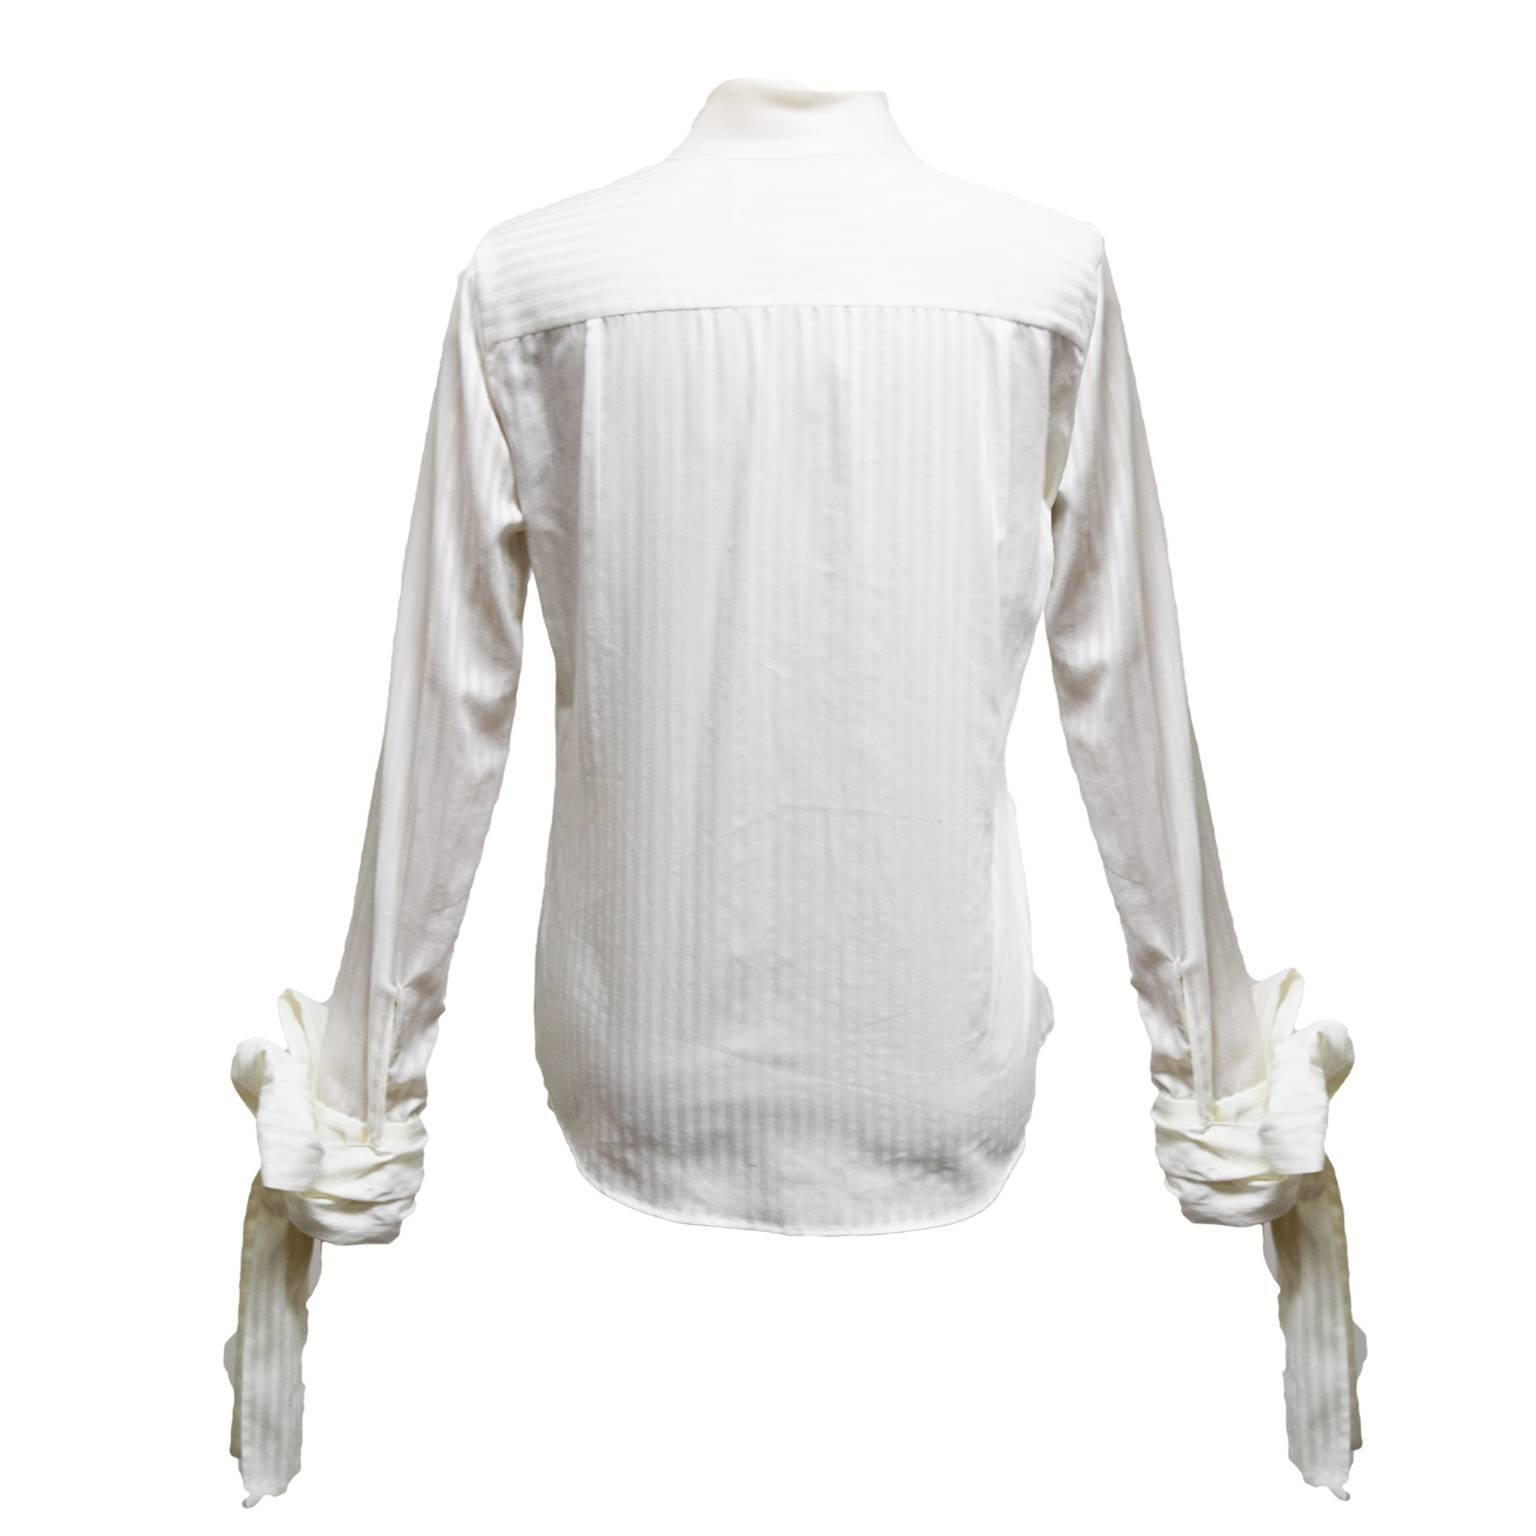 This amazing blouse by Viktor & Rolf is a cotton and silk blend, has a petter pan collar, is silk breasted, striped printed, and has tied bows at the end of each sleeve. 